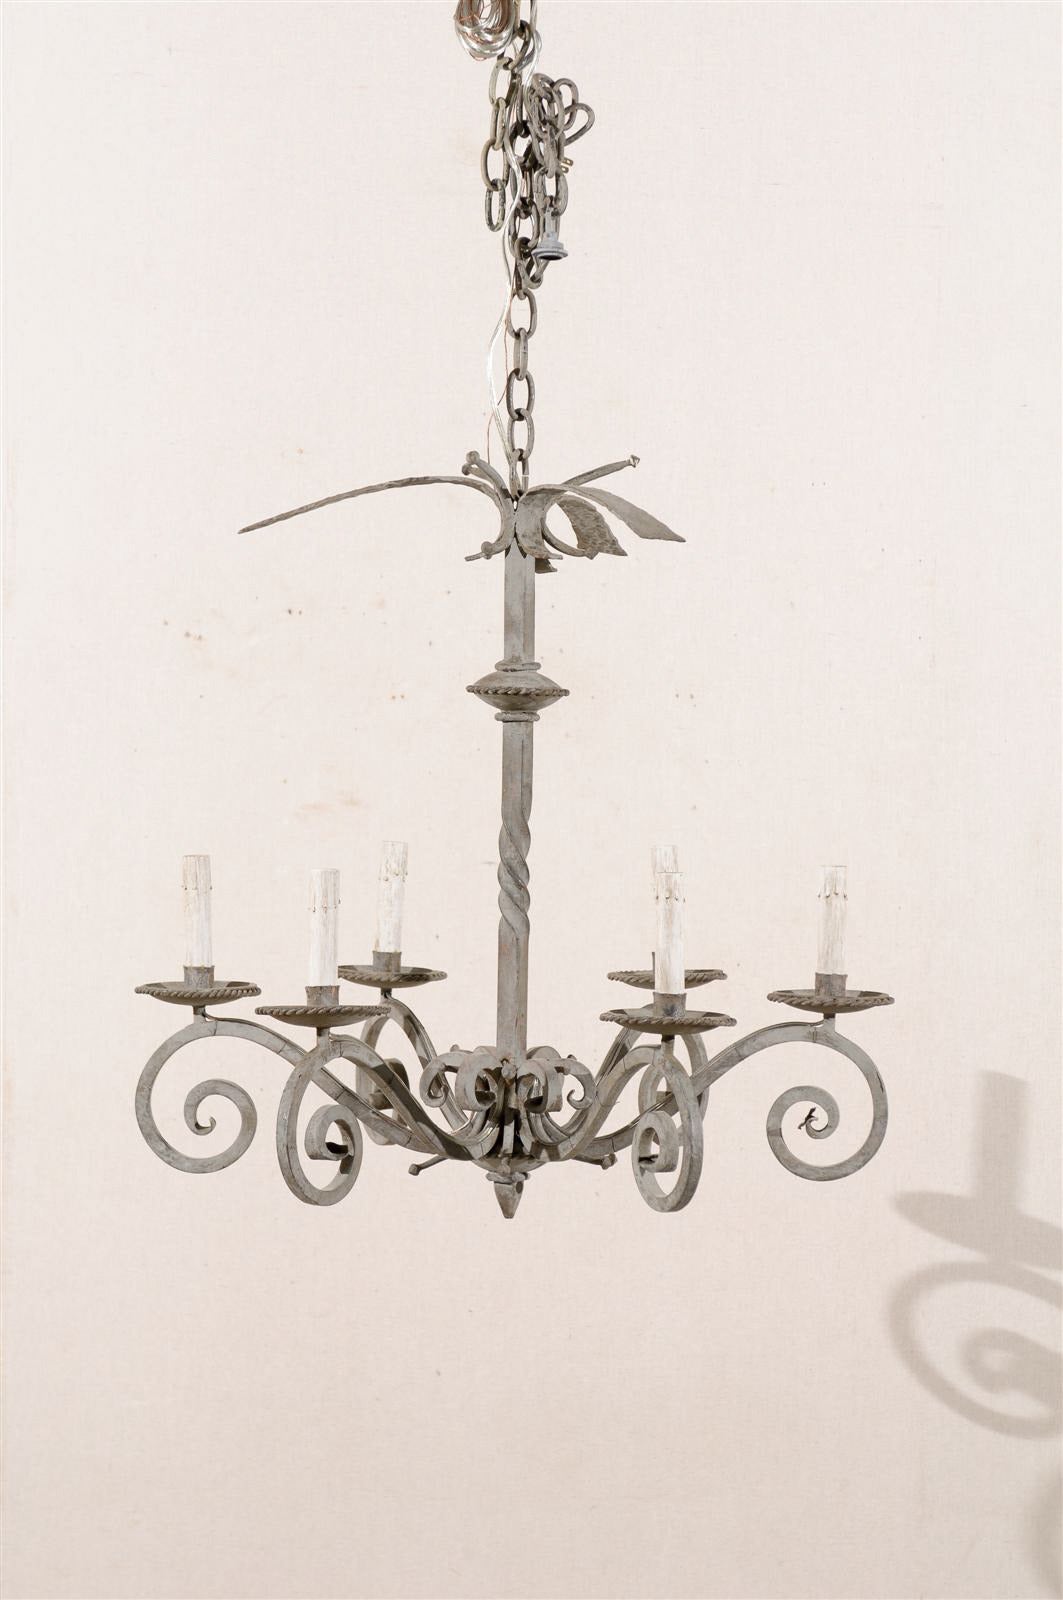 A French vintage six-light painted iron chandelier with S-scrolled arms and a twisted central column. This French metal chandelier from the mid-20th century has been rewired for the US and comes with a complimentary 3-foot chain and canopy painted